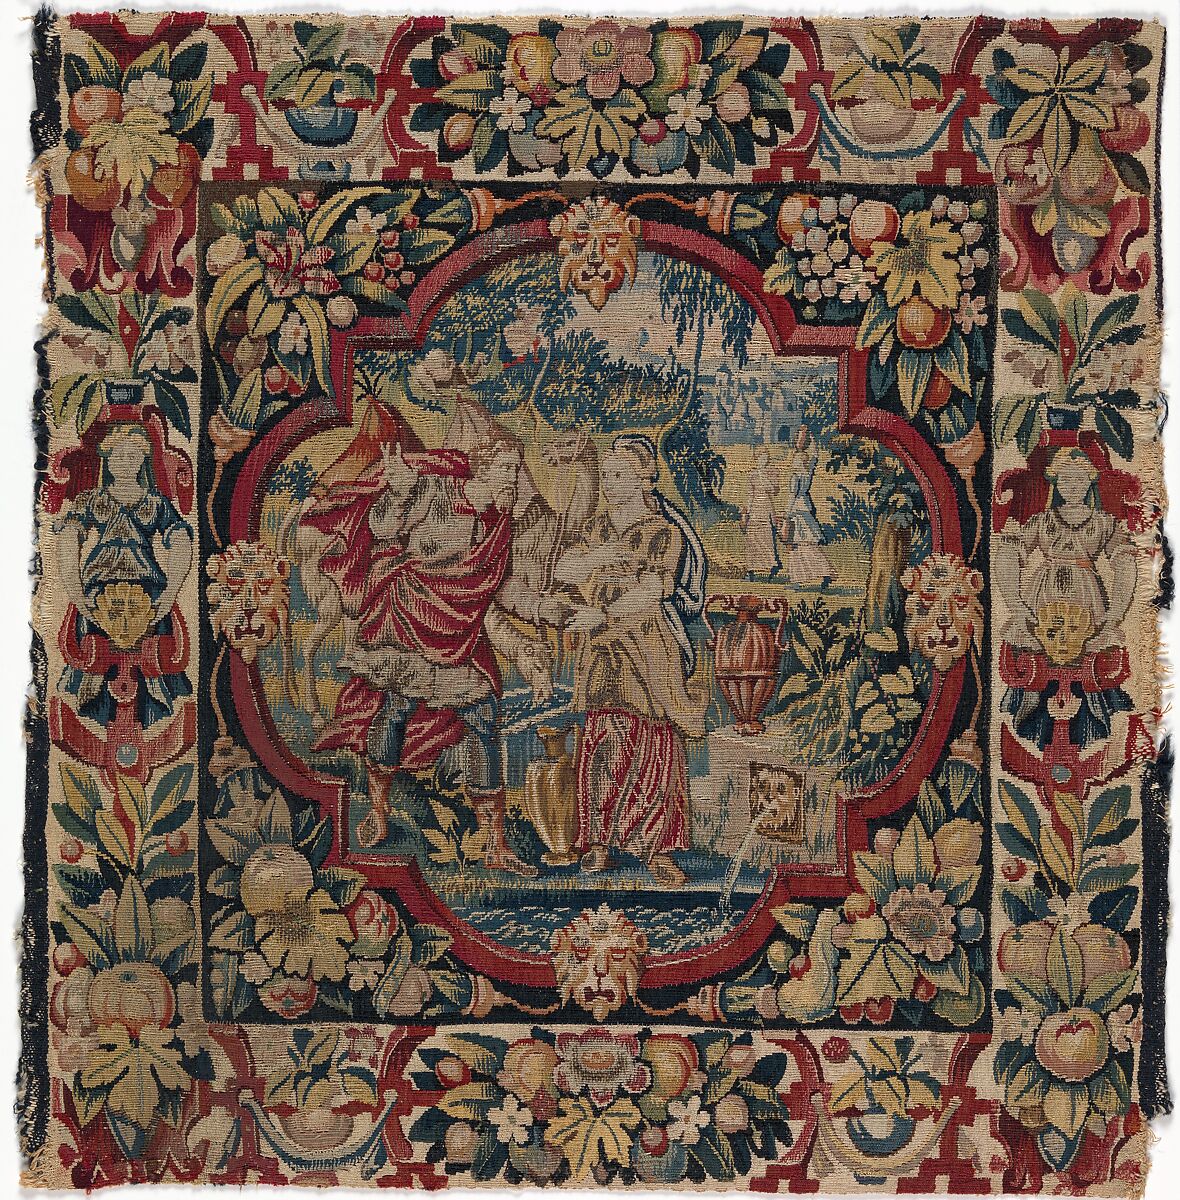 Rebekah and Eliezer at the Well from the Story of Abraham, Wool, silk, silver-gilt thread (21 warps per inch, 9 per cm.), Flemish 